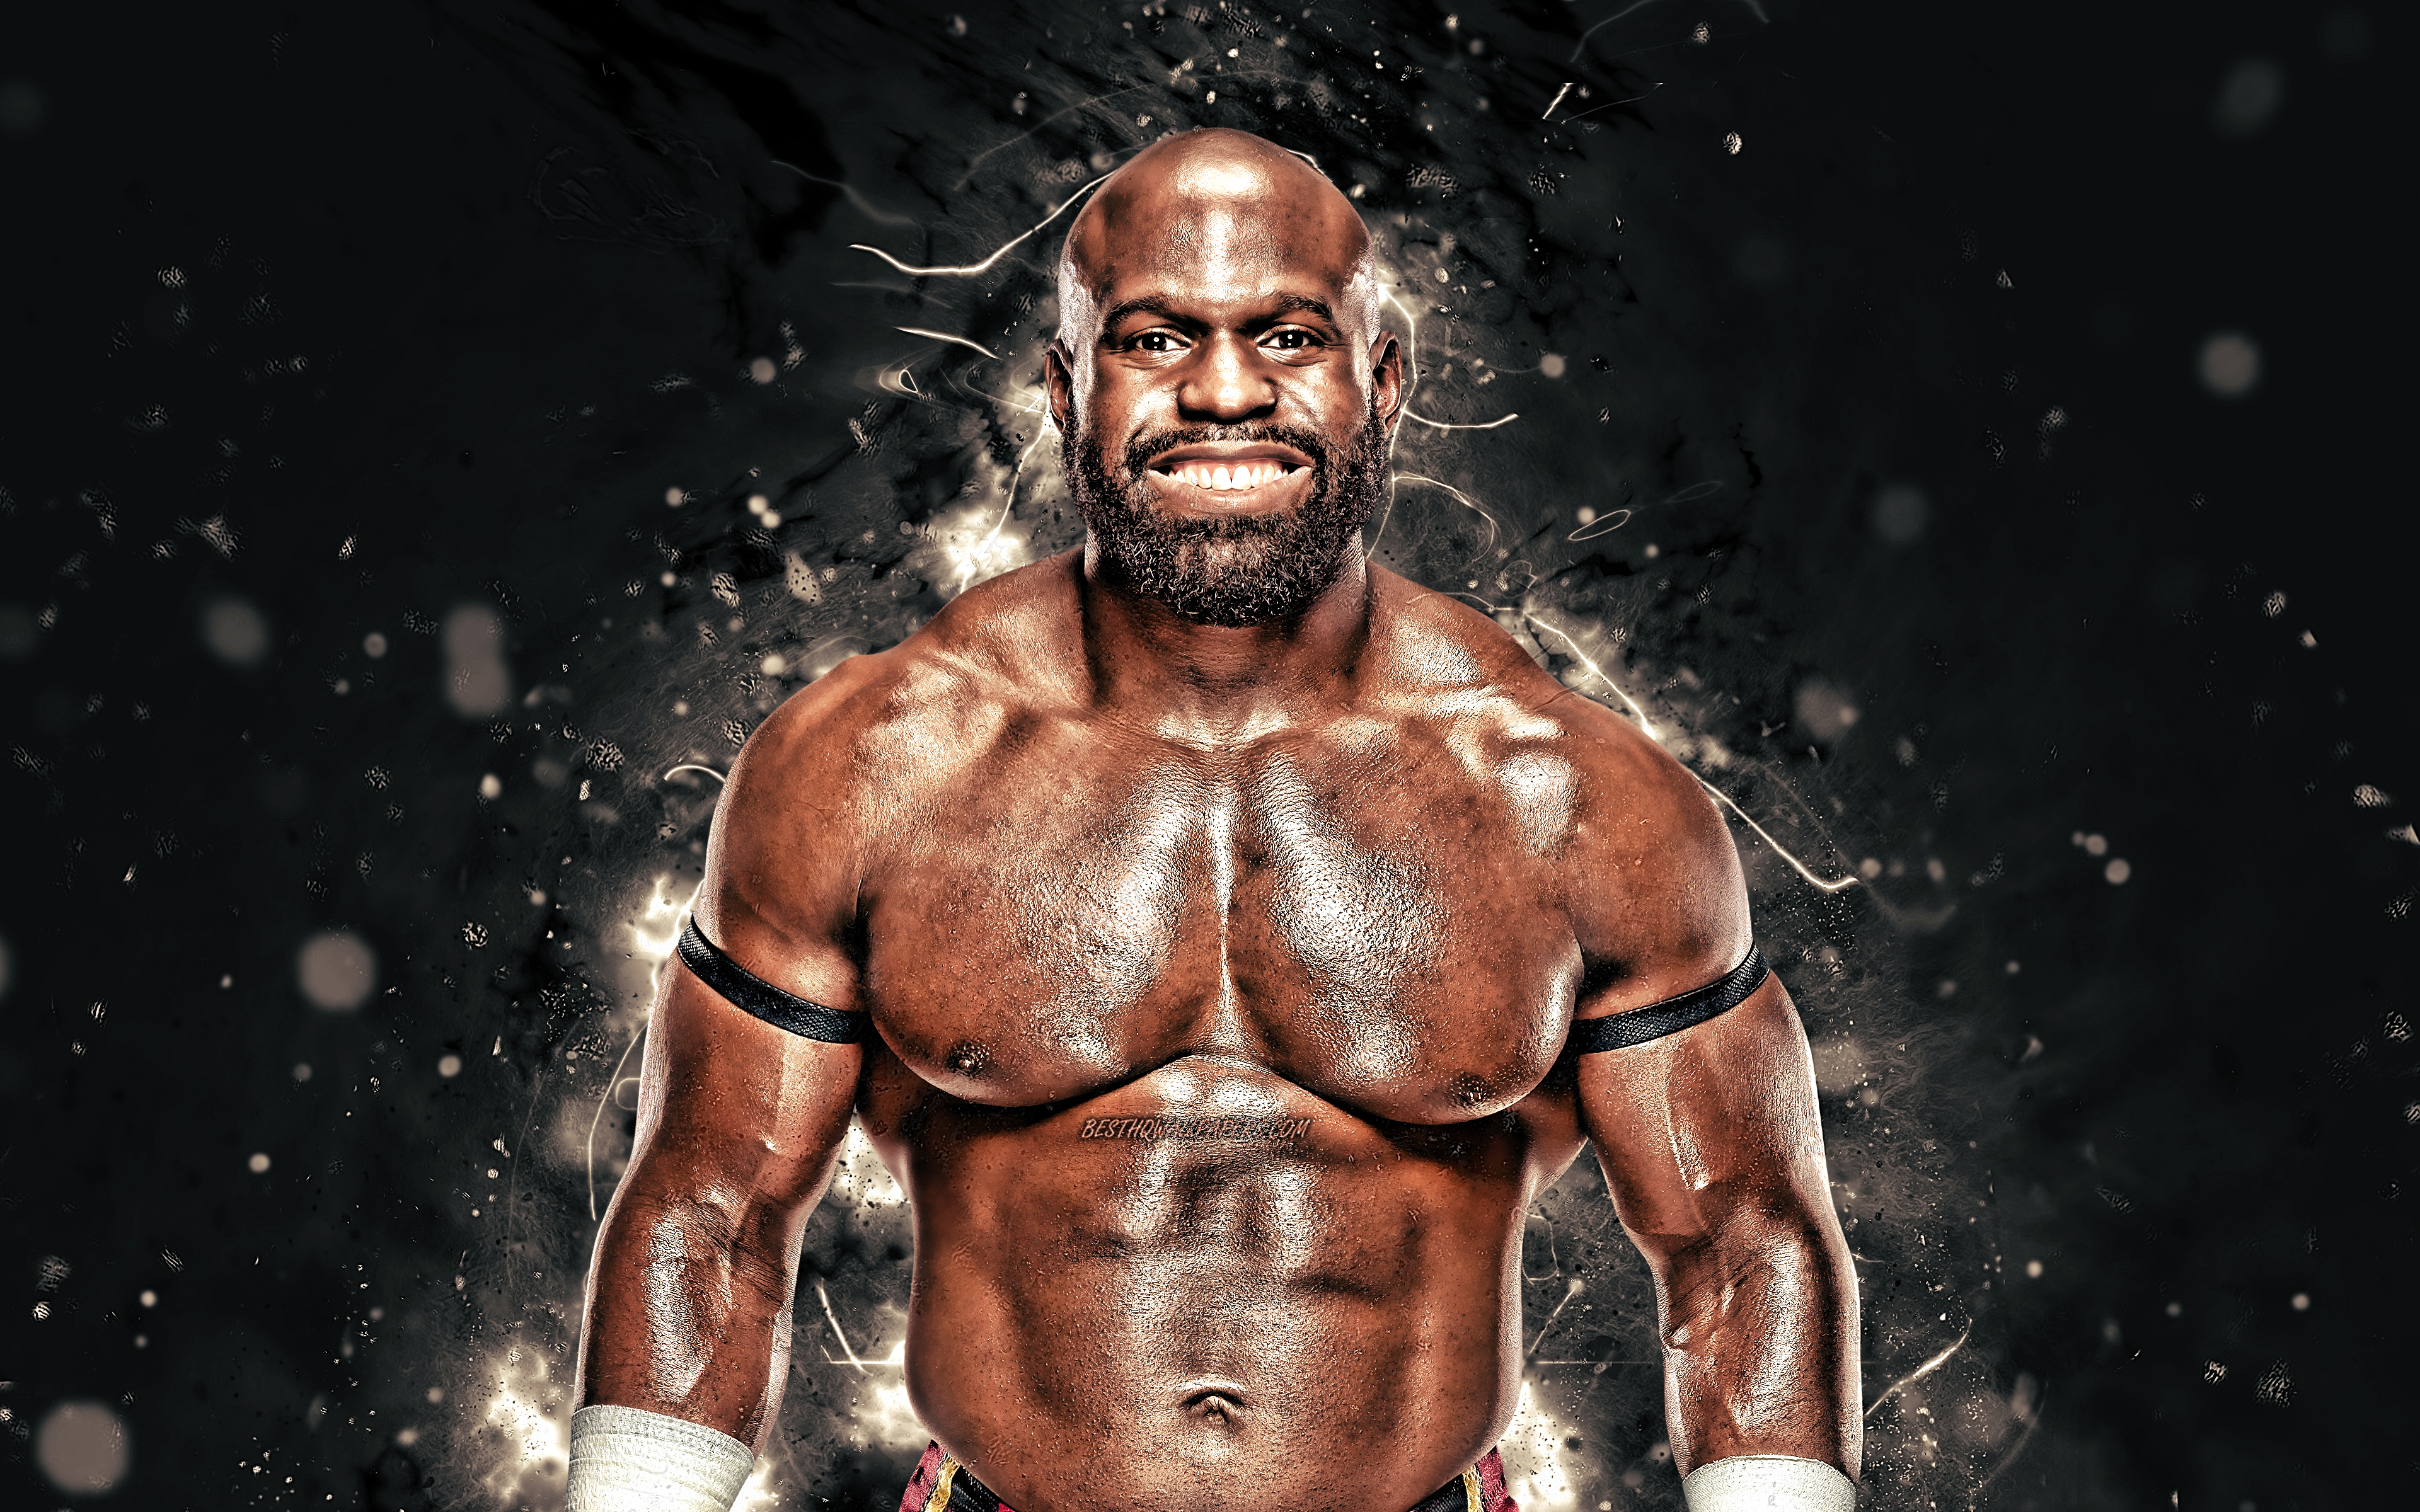 Download wallpaper Apollo Crews, 4k, american wrestlers, WWE, wrestling, neon lights, Sesugh Uhaa, wrestlers, Apollo Crews 4K for desktop with resolution 3840x2400. High Quality HD picture wallpaper